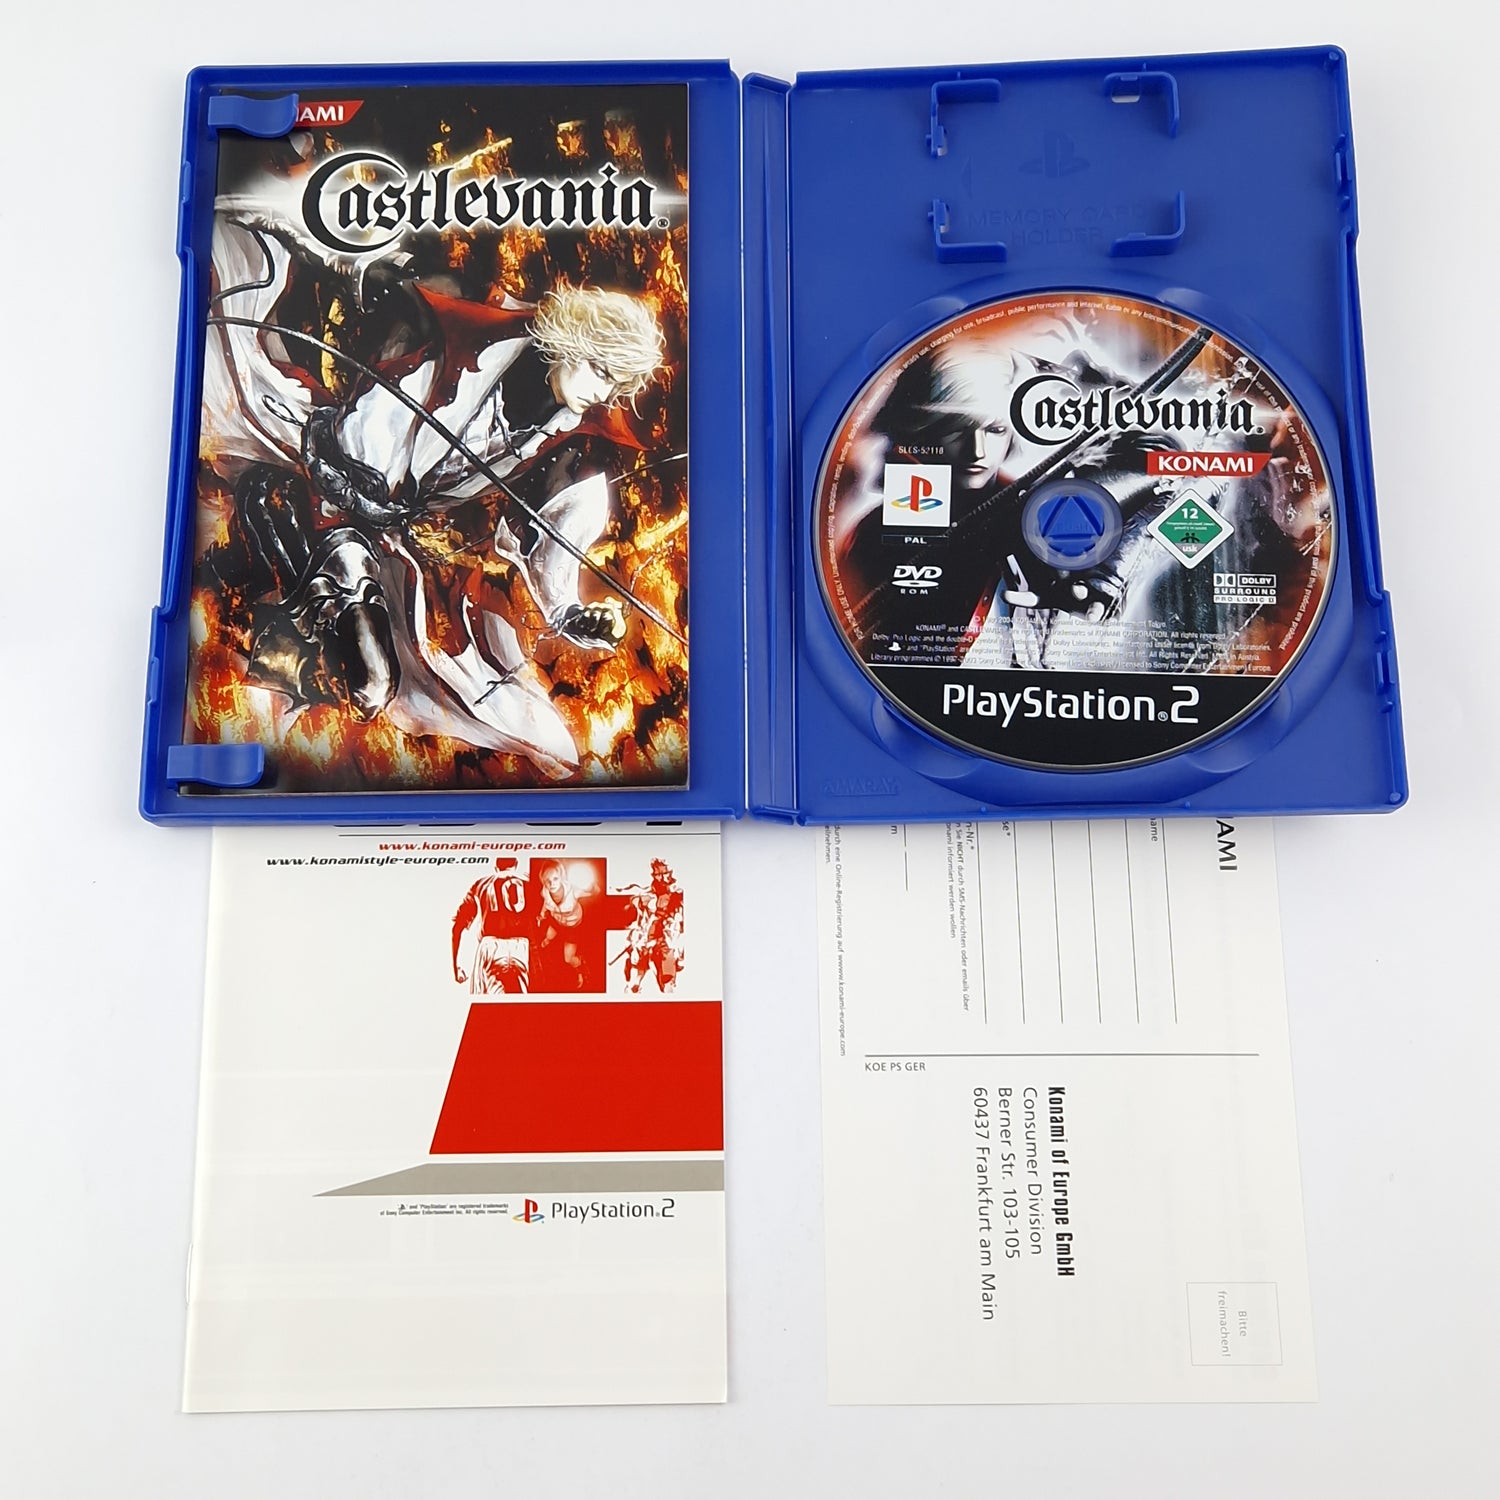 Playstation 2 Spiel : Castlevania - CD Anleitung OVP SONY PS2 PAL